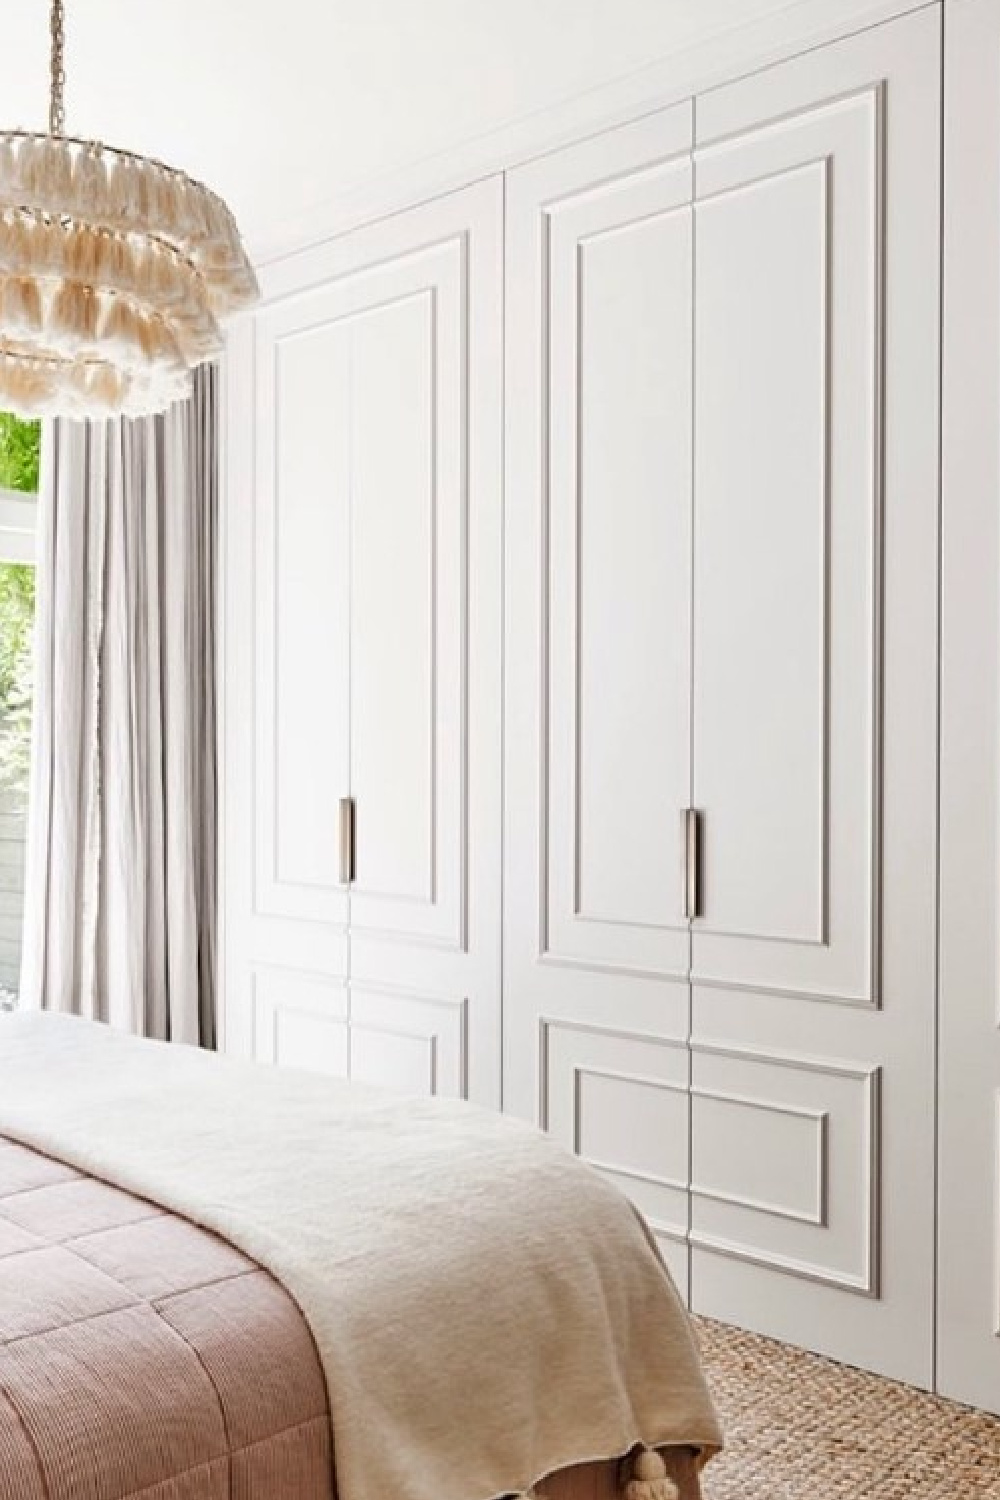 Pavilion Gray (Farrow & Ball) on built-in wardrobes in a bedroom - DBD Interiors. #paviliongray